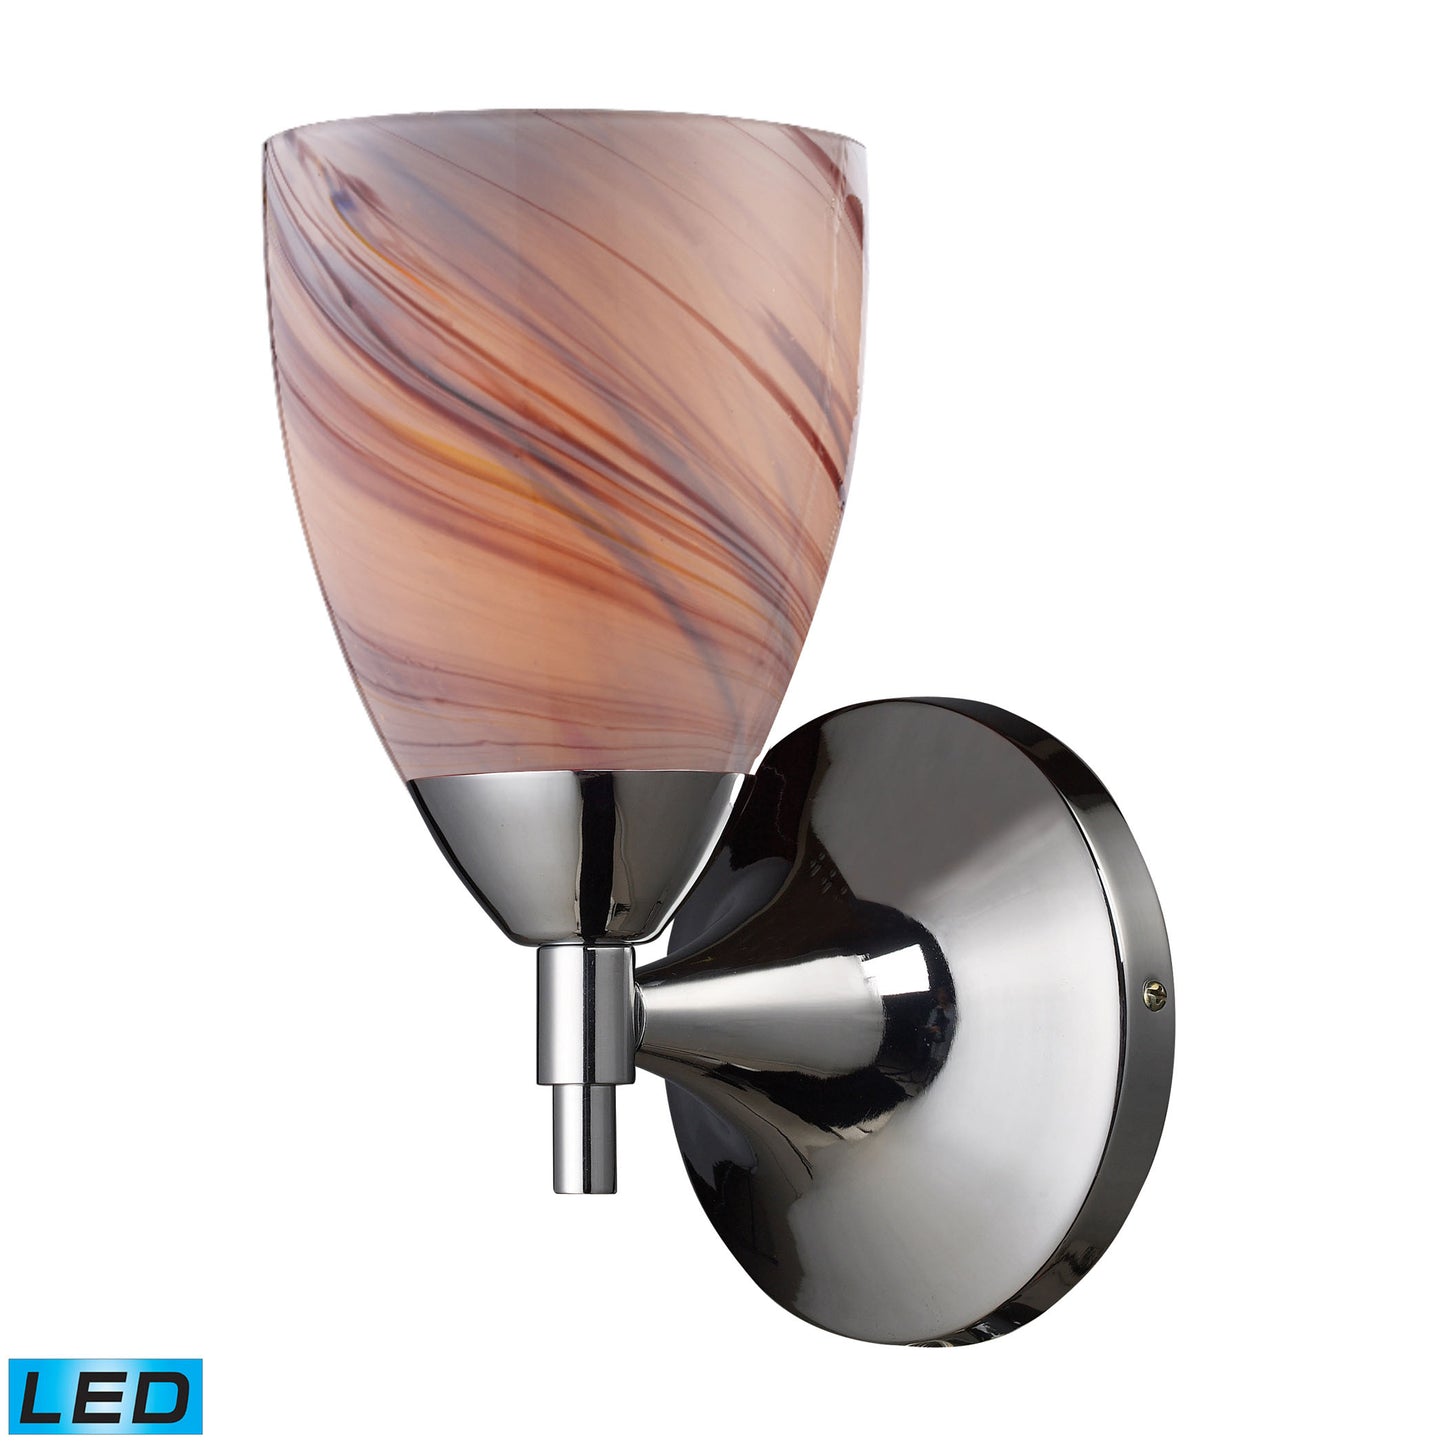 Celina 1-Light Wall Lamp in Polished Chrome with Creme Glass - Includes LED Bulb